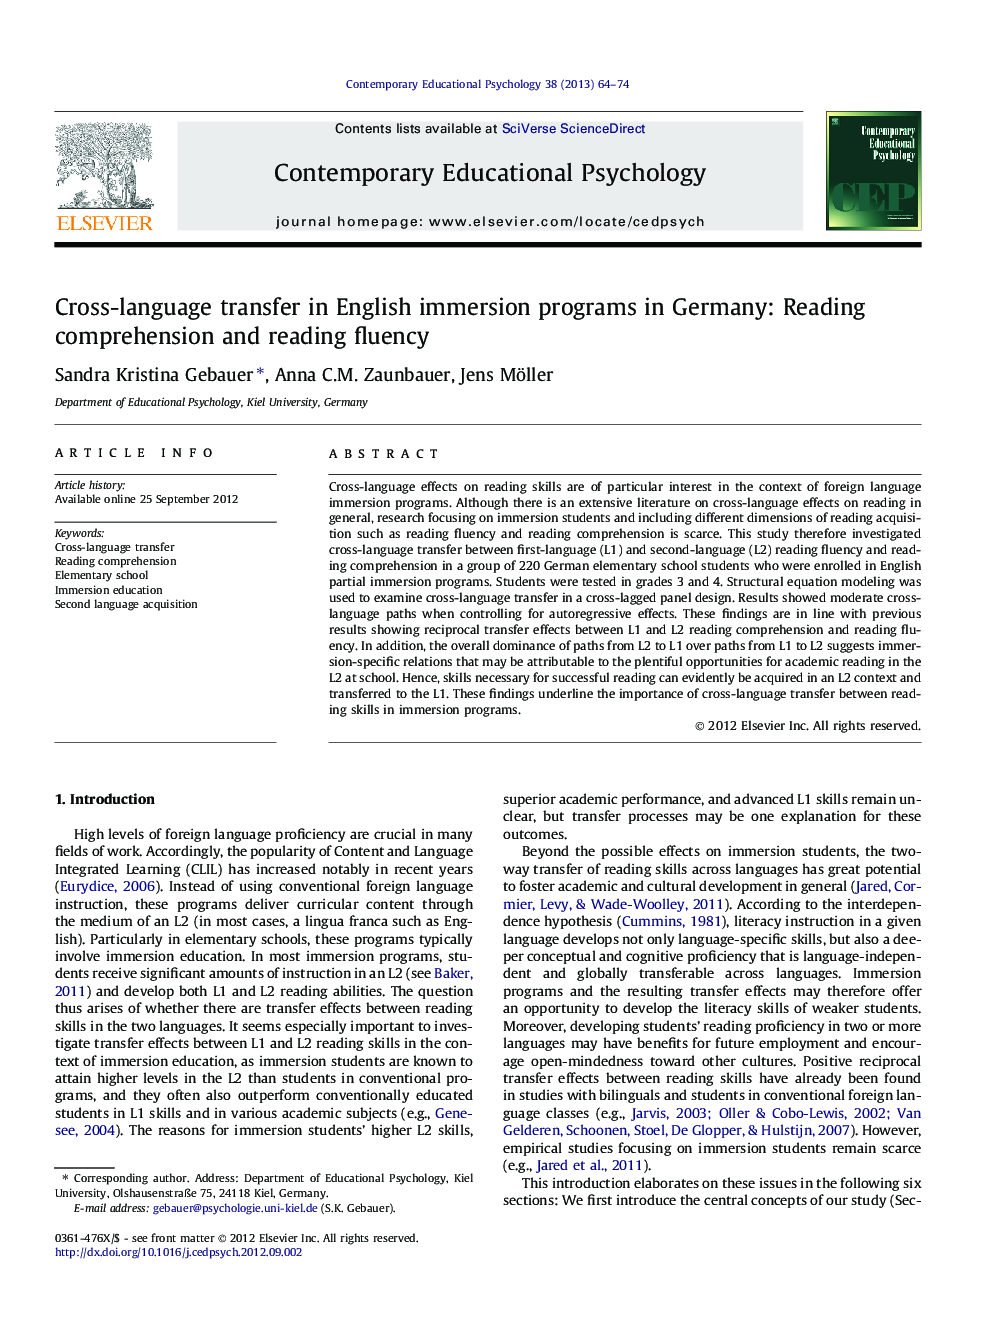 Cross-language transfer in English immersion programs in Germany: Reading comprehension and reading fluency